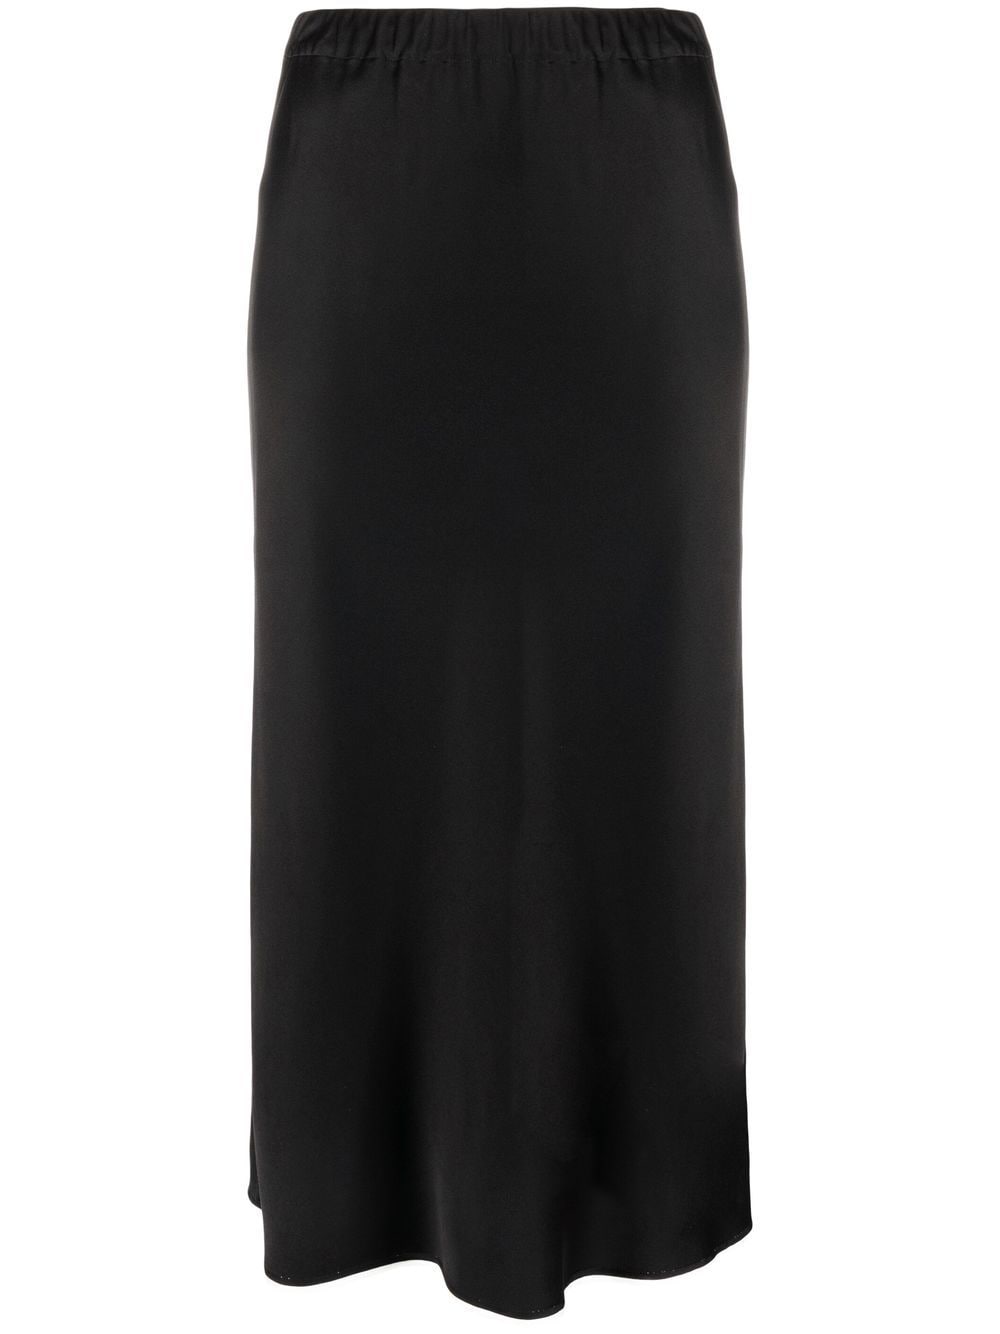 There Was One bias-cut midi skirt - Black von There Was One